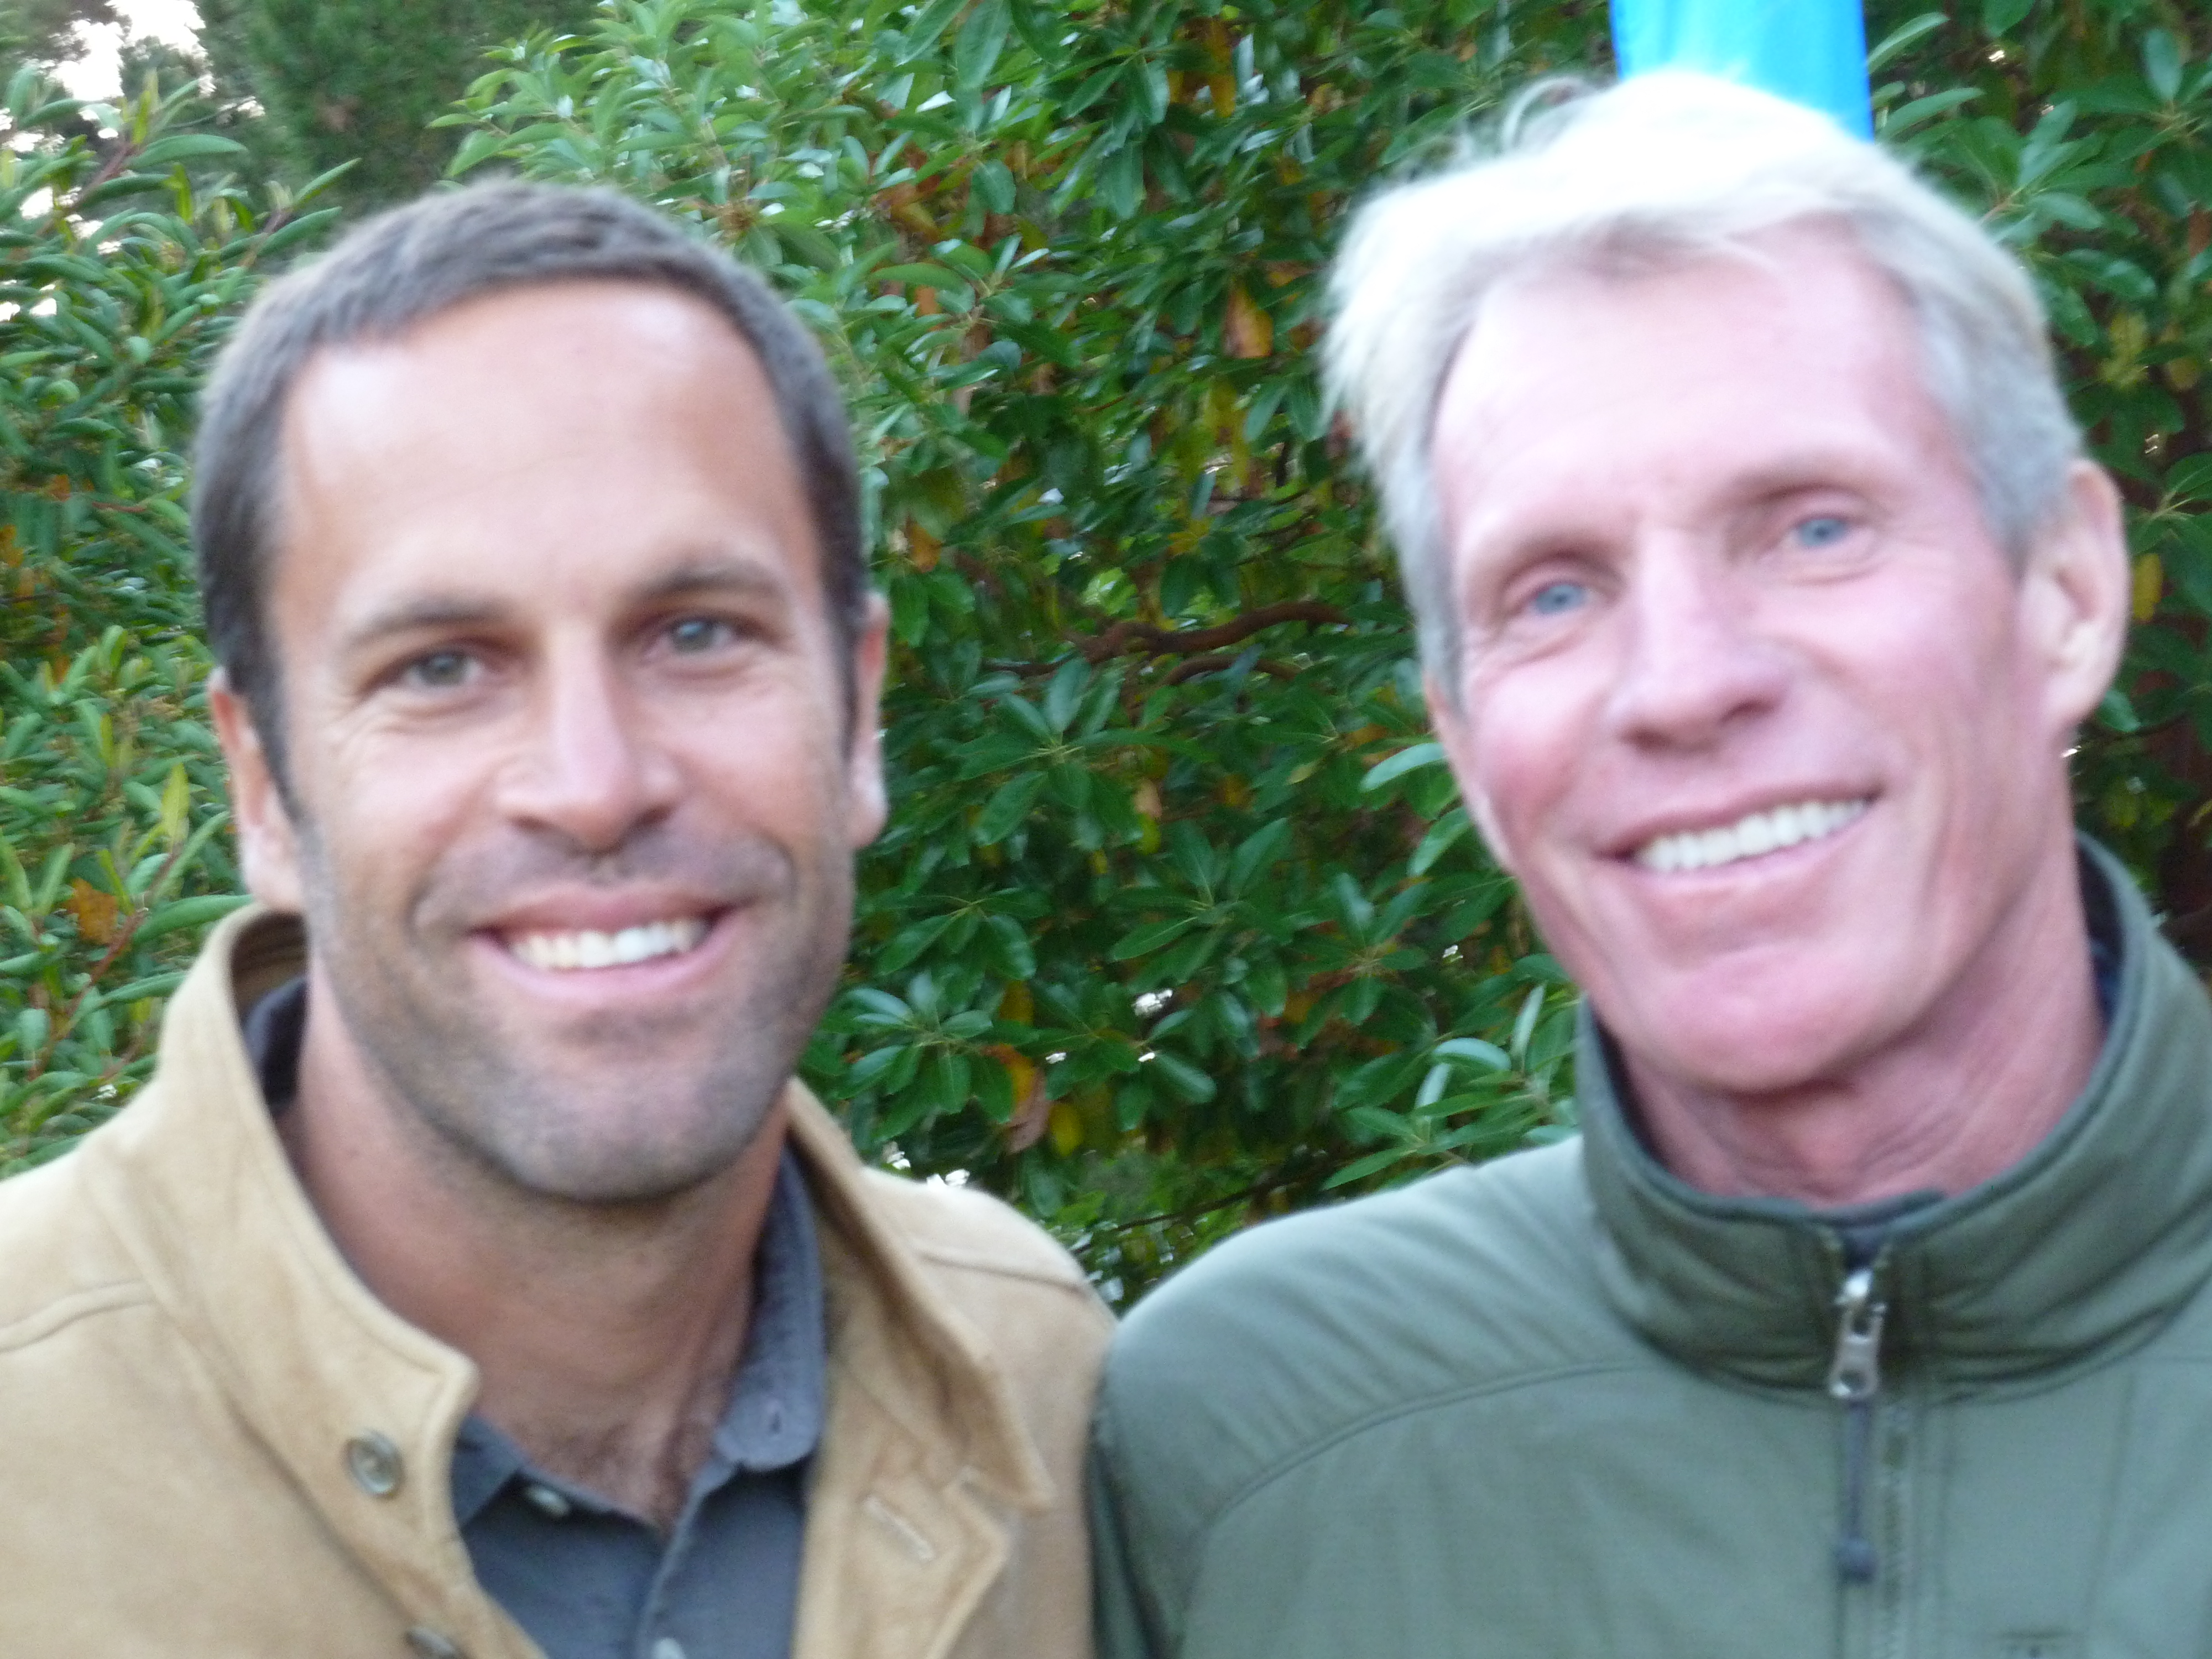 Jack Johnson and Steve Nichols at private function.